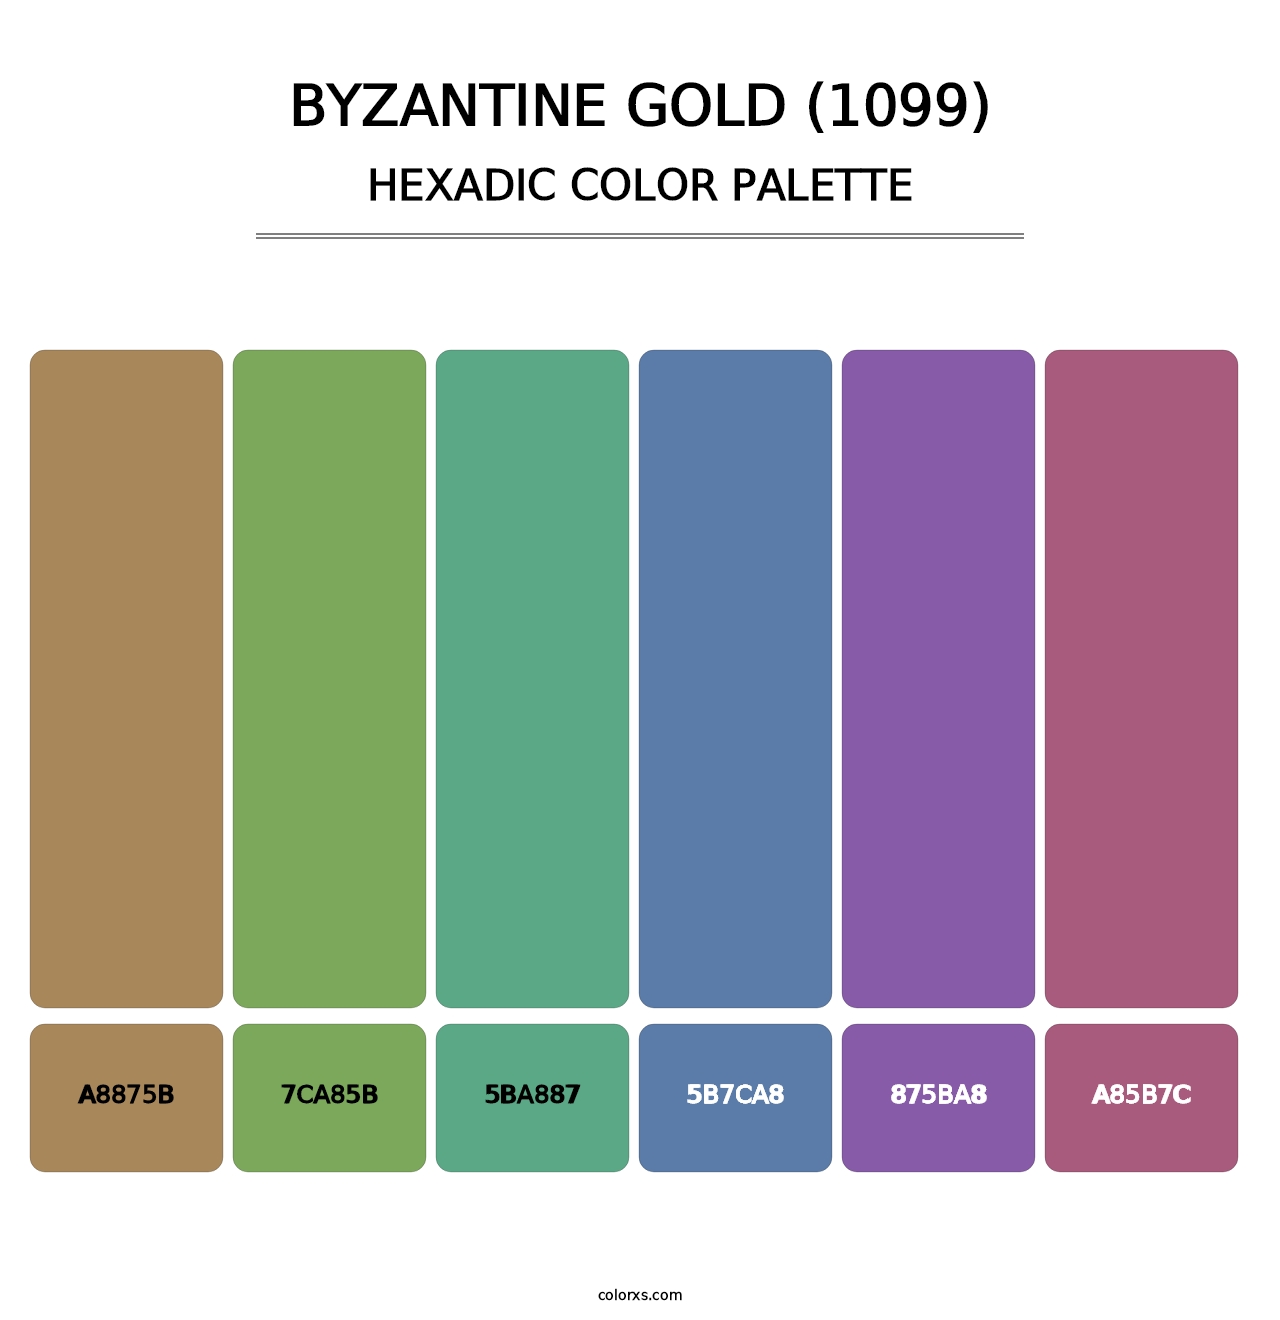 Byzantine Gold (1099) - Hexadic Color Palette